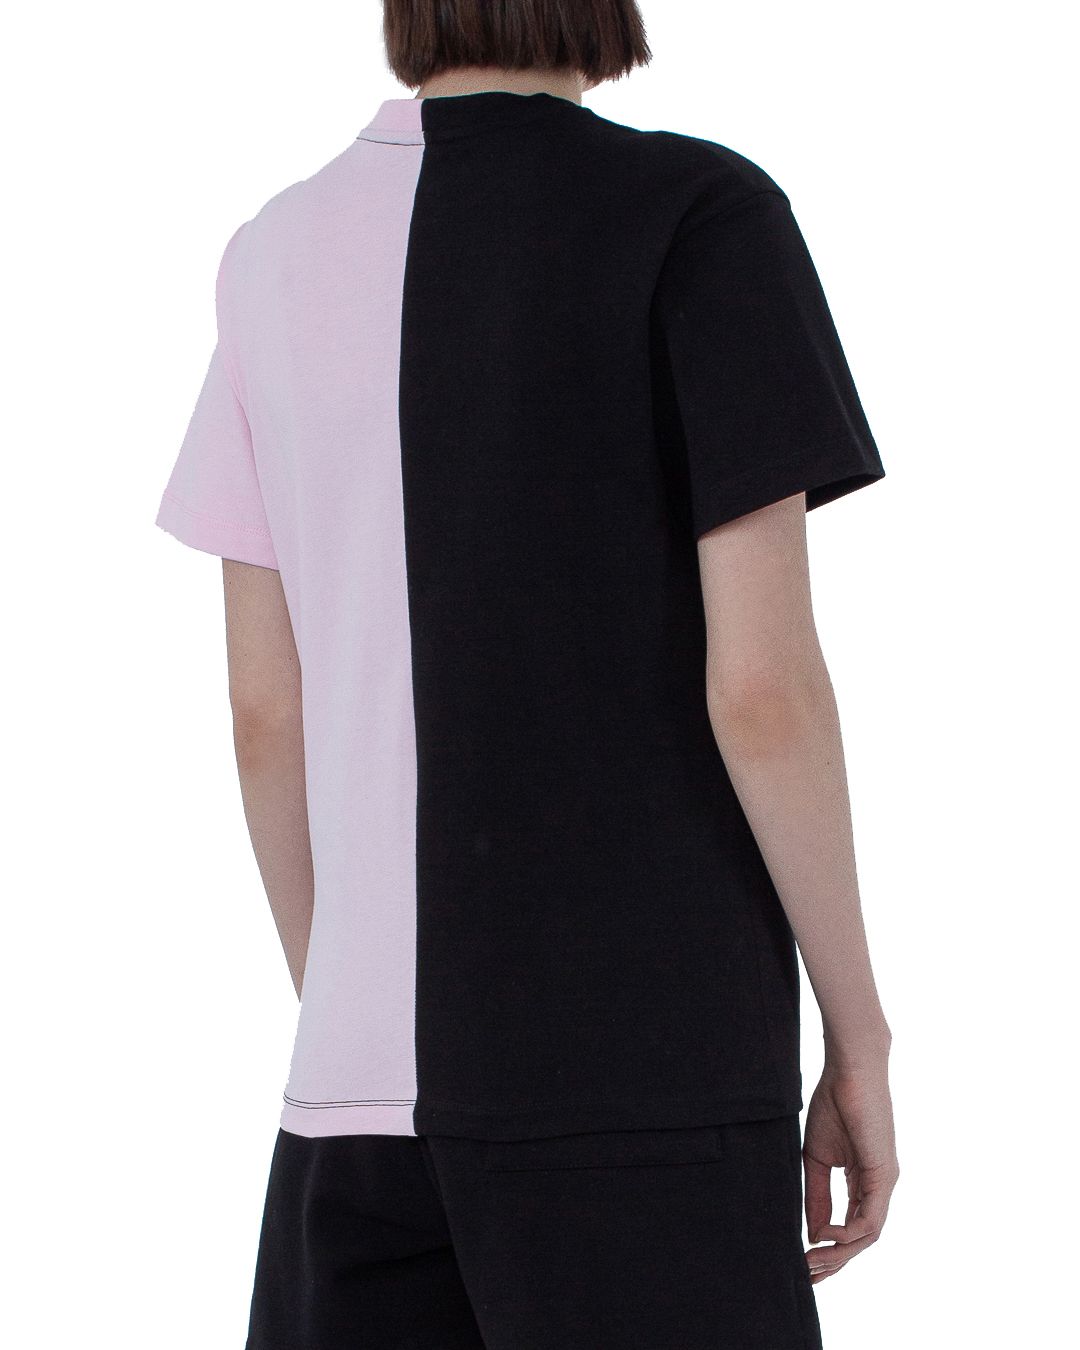 Comme Des Fuckdown Chic Two-Tone Cotton Tee for Stylish Women